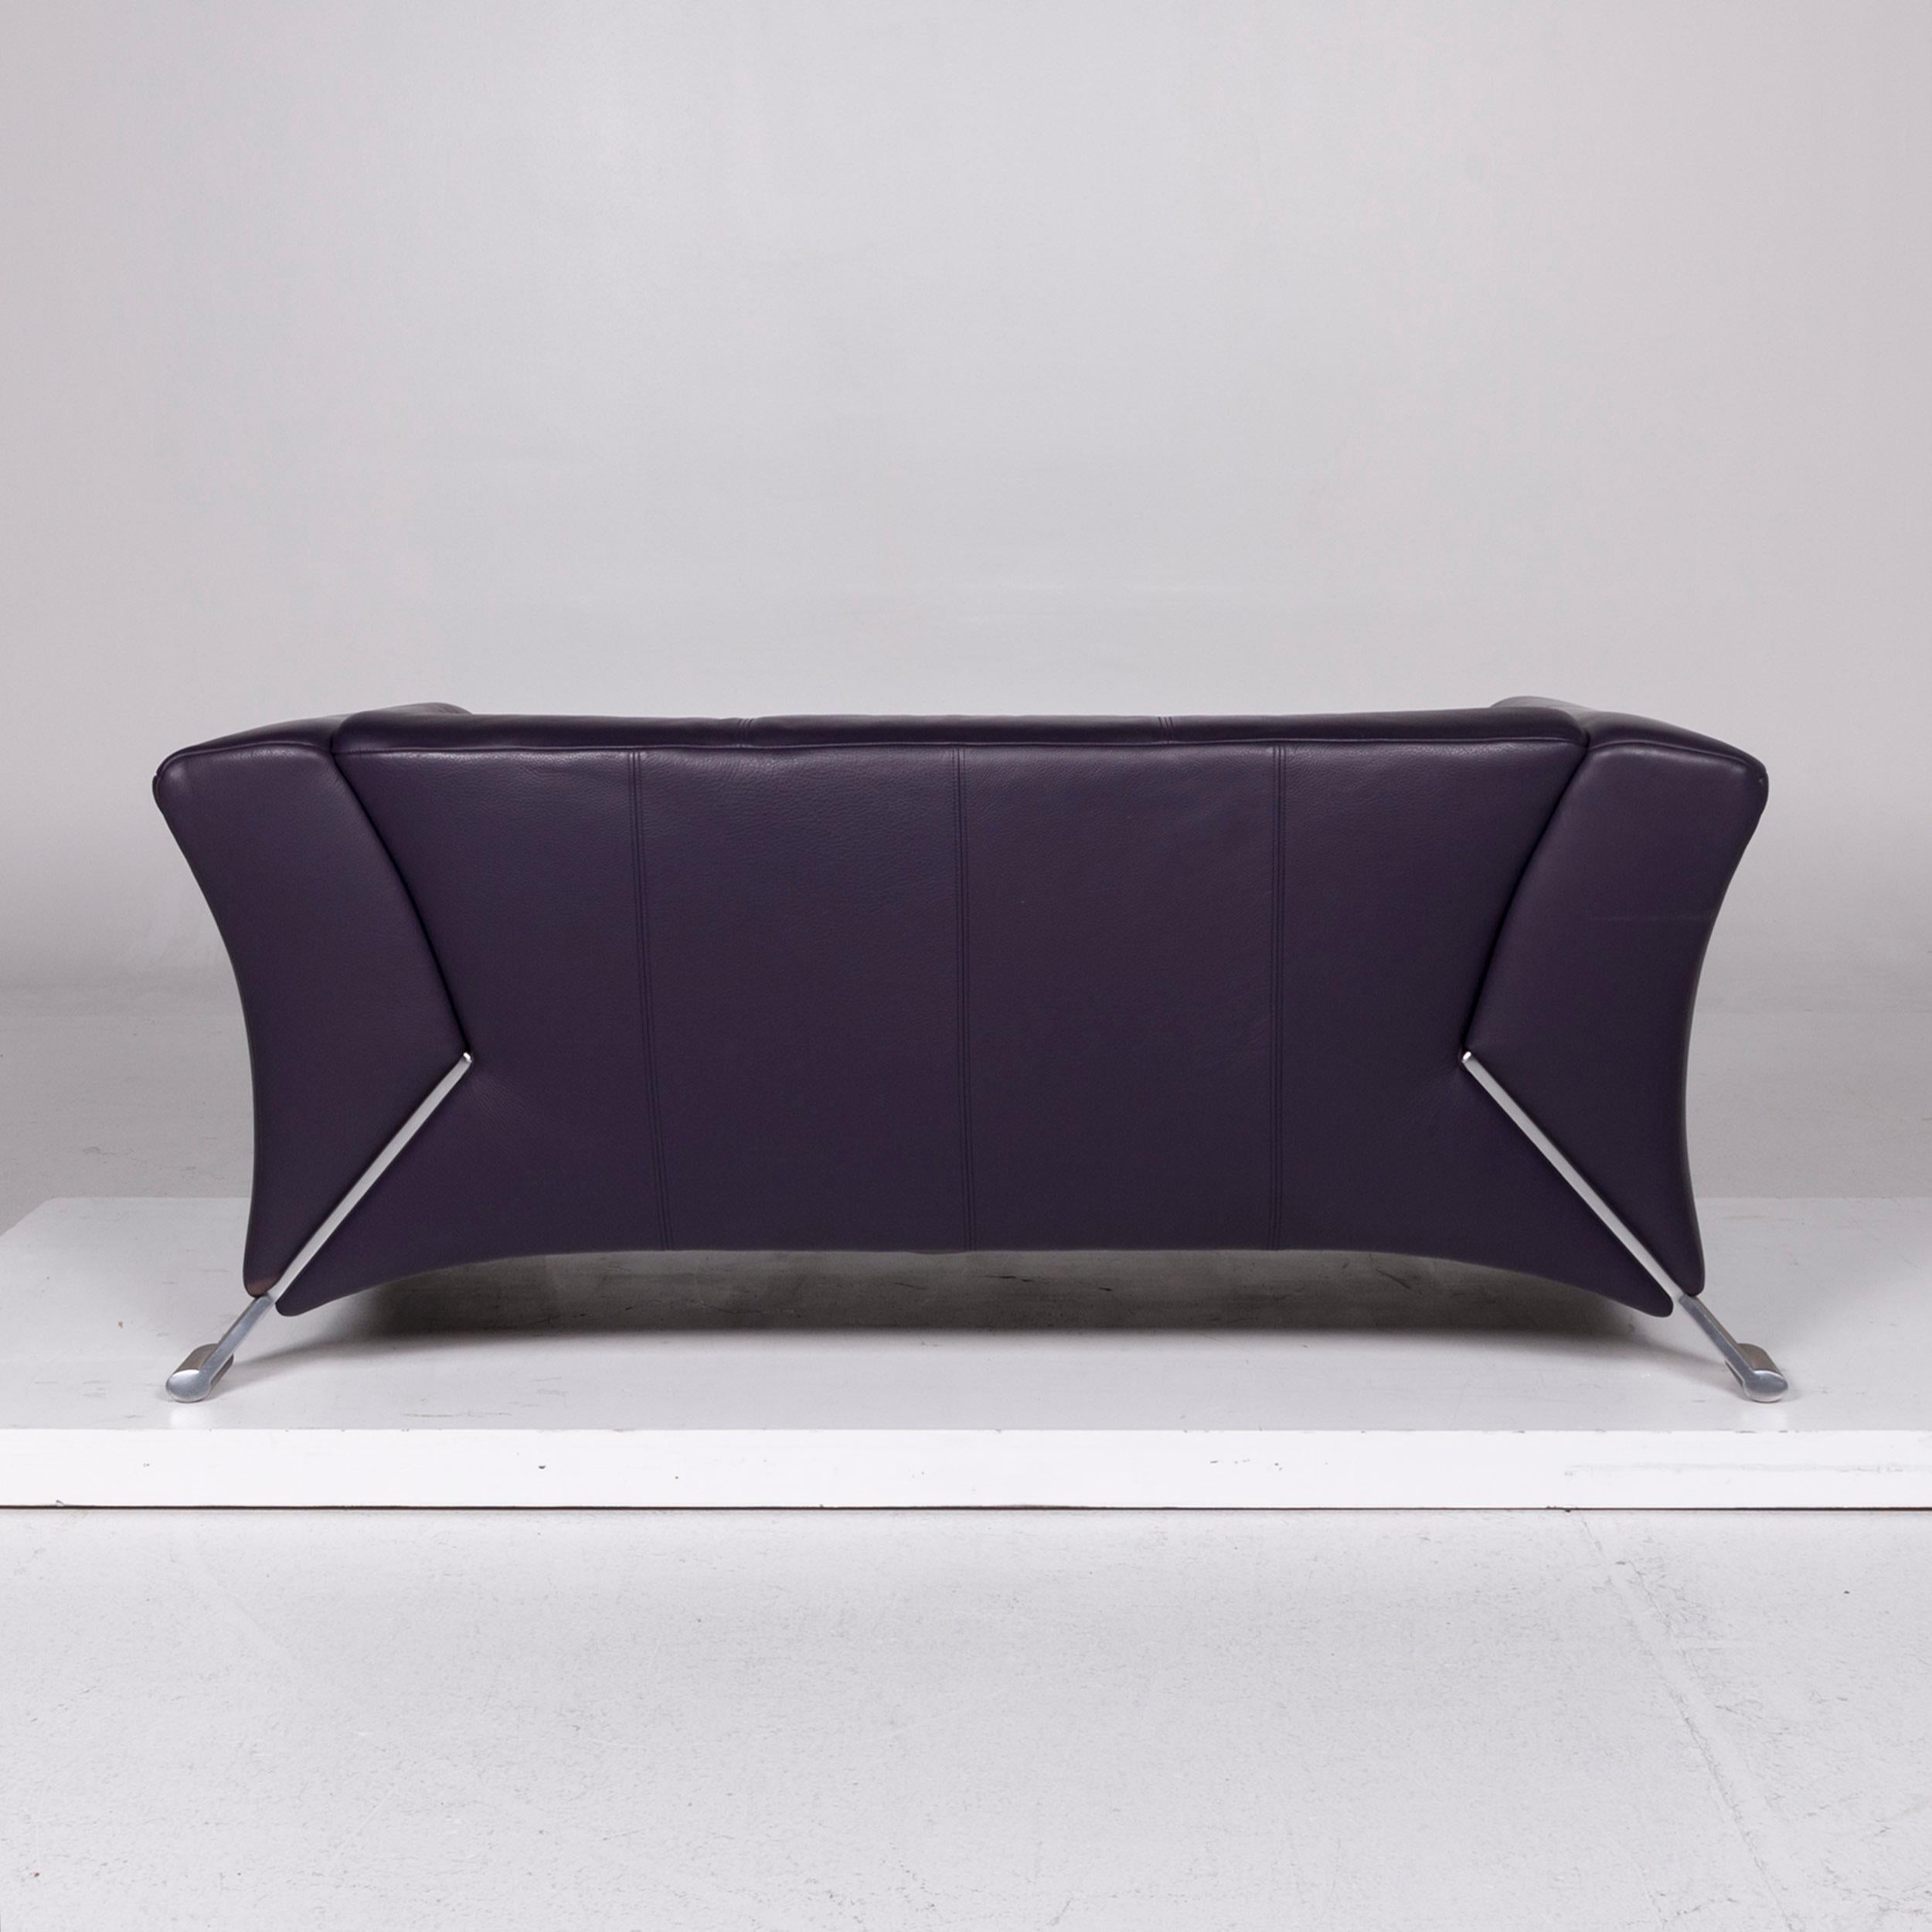 Rolf Benz 322 Leather Sofa Violet Two-Seat Couch For Sale 1